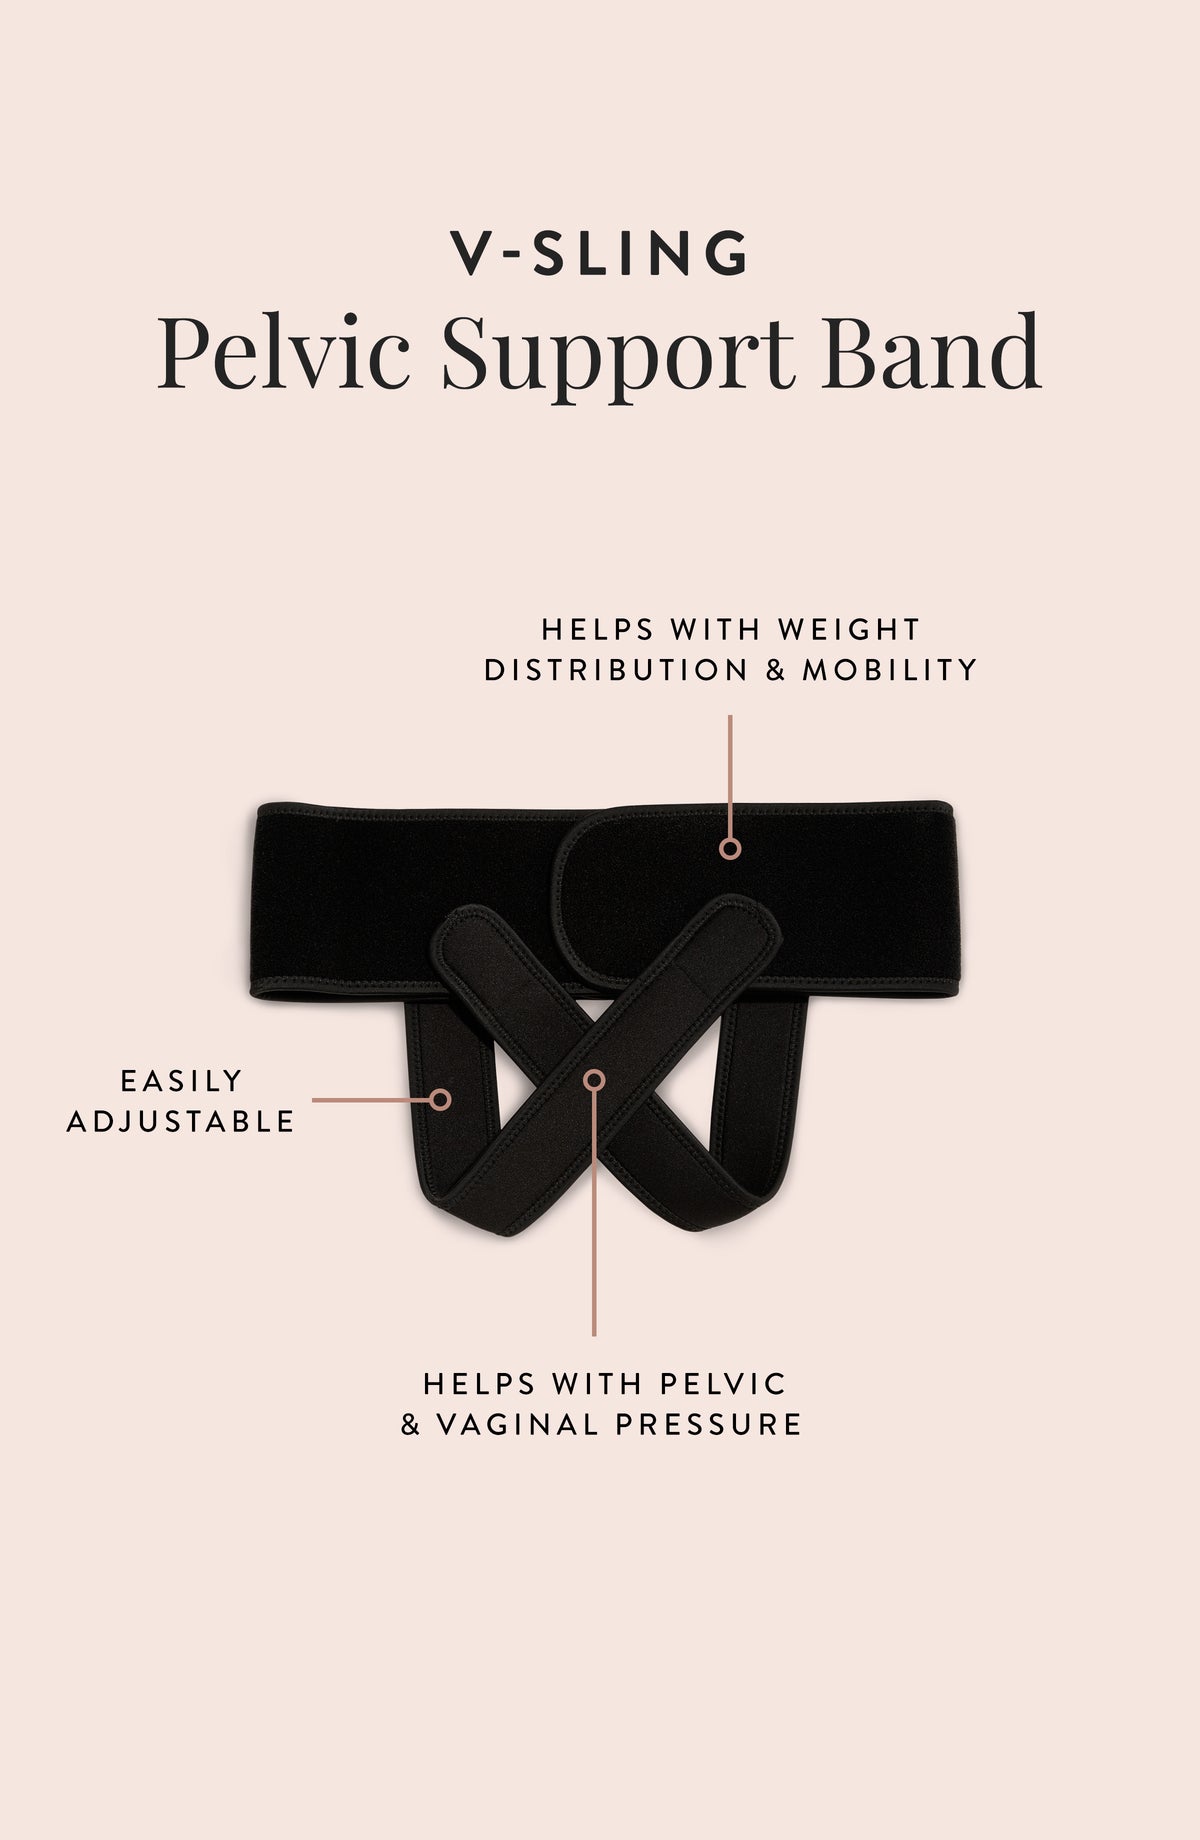 4 Piece Maternity Support Band Set for Pelvic Floor, Belly, Back Pain,  Hernia, Vulvar Varicosities, SPD, With Shoulder Straps, Groin Bands 